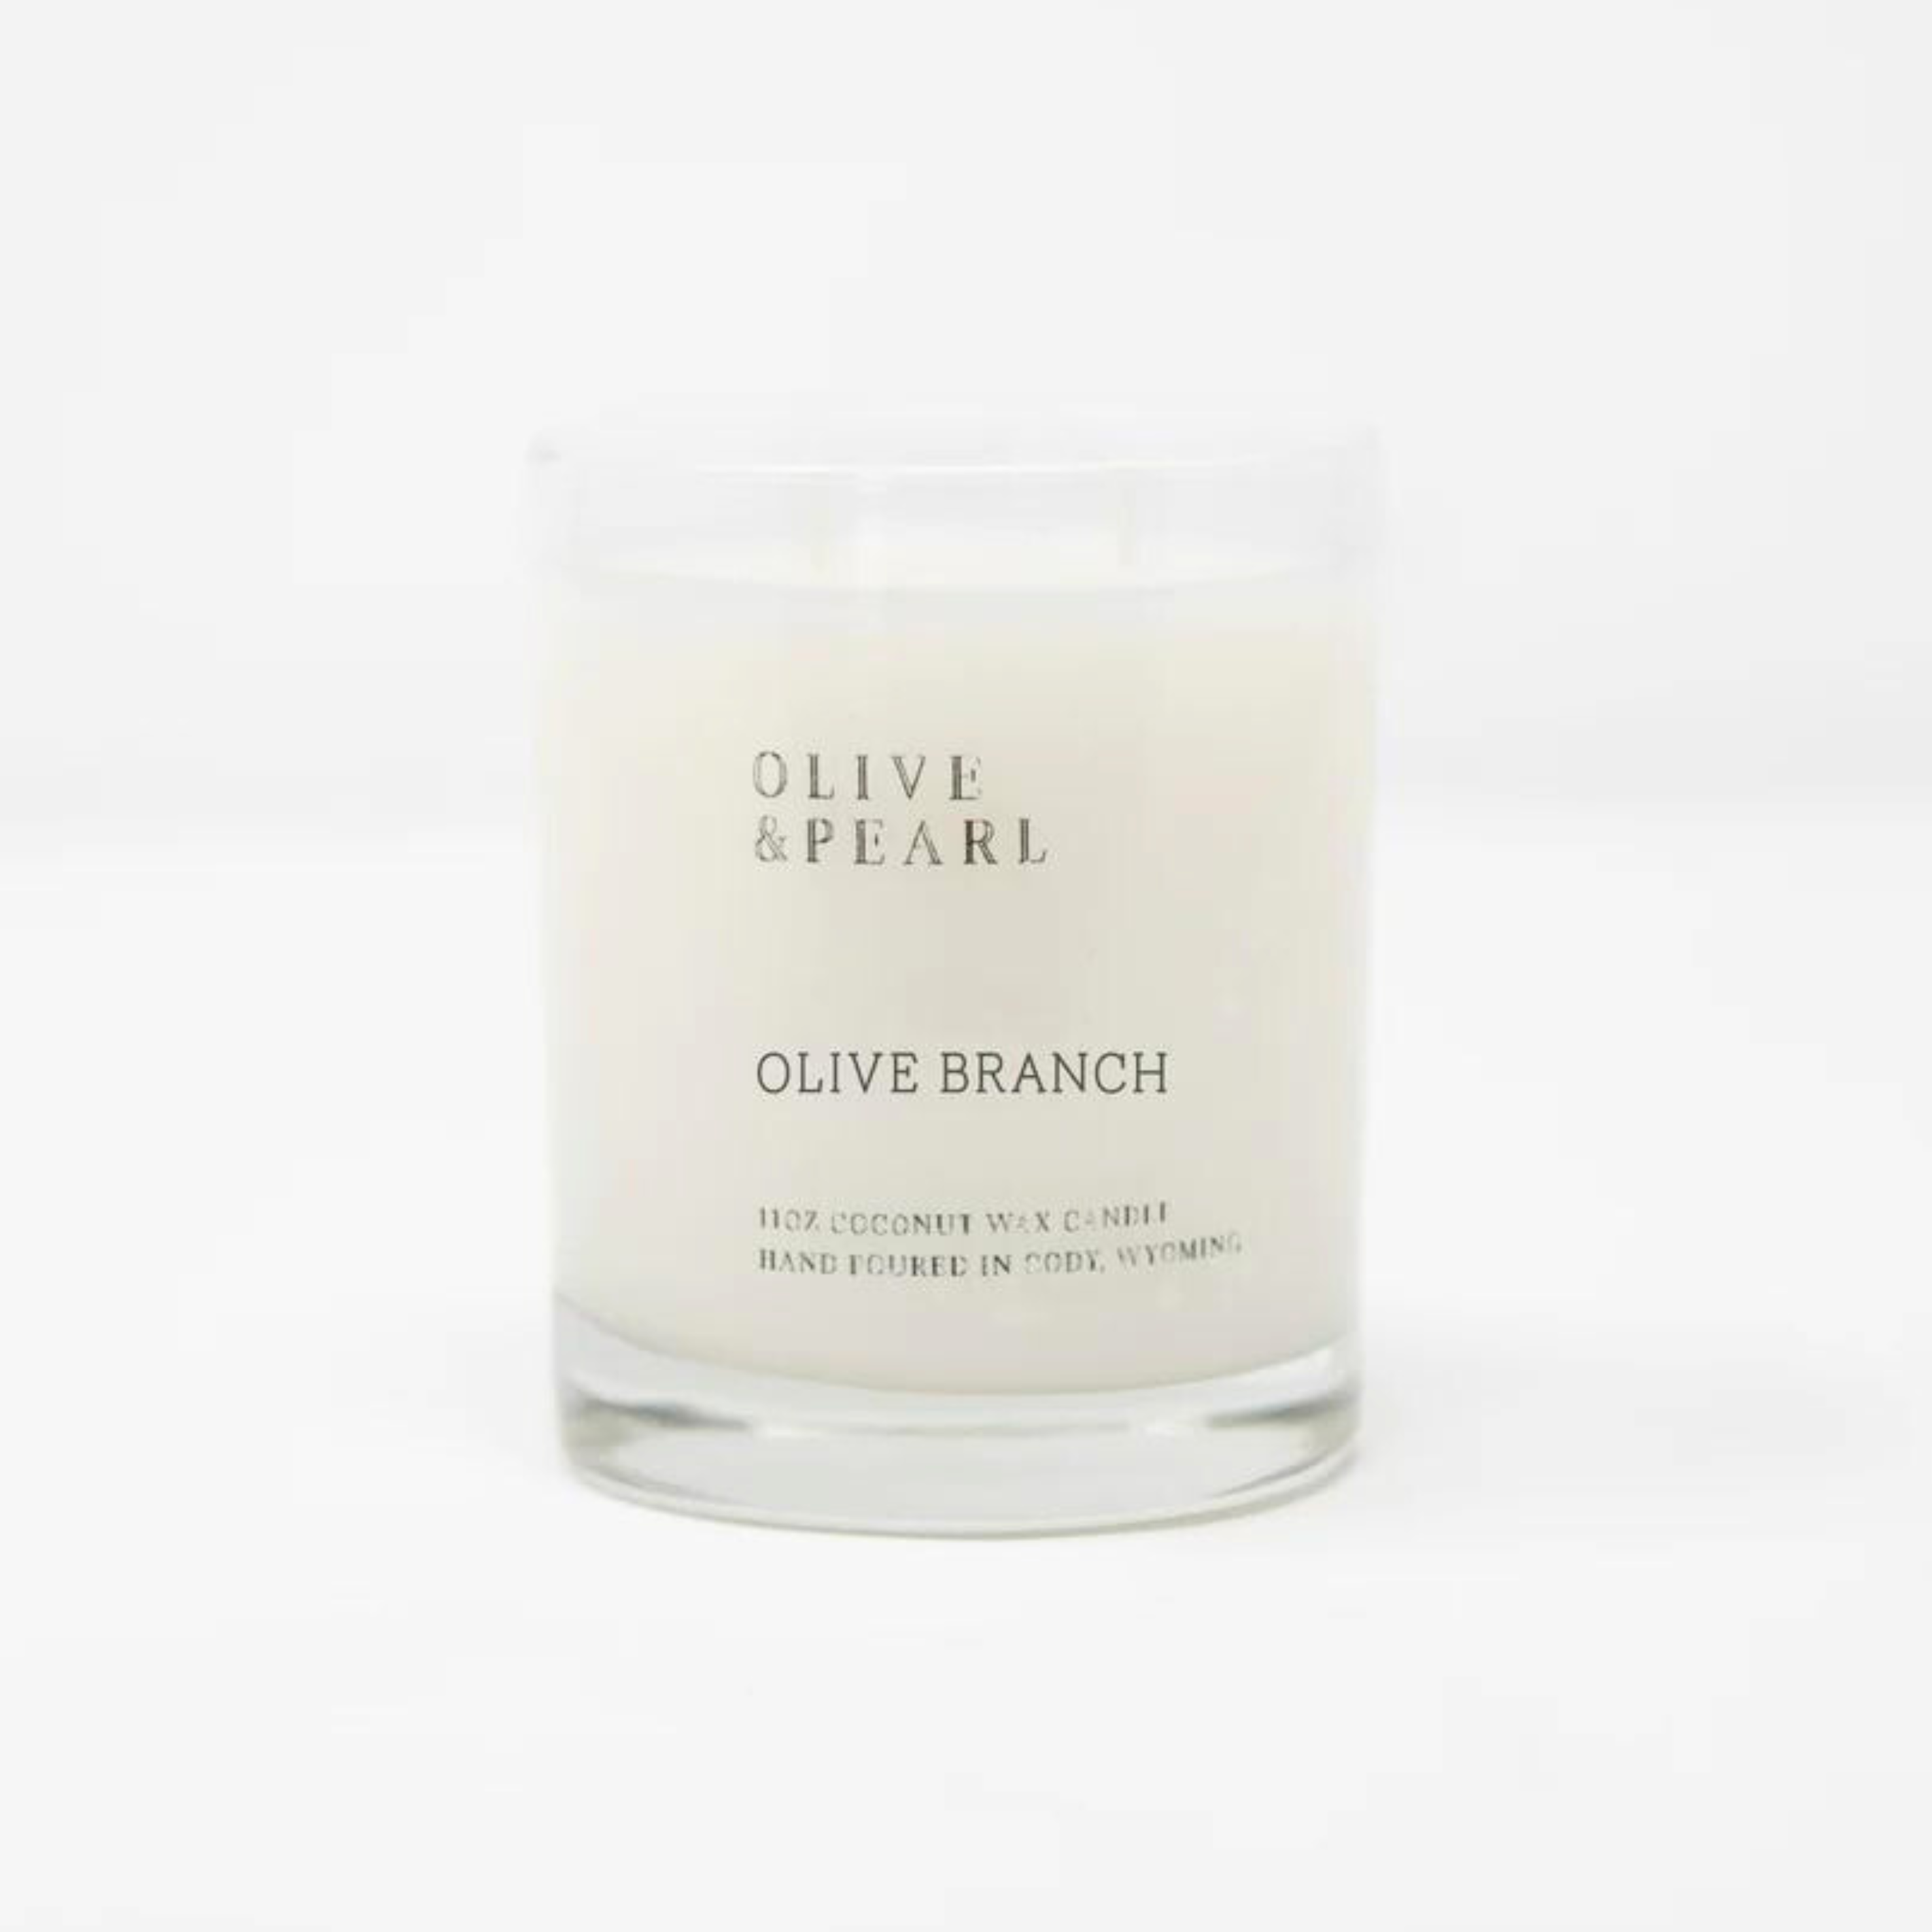 Olive & Pearl Candle - Olive Branch